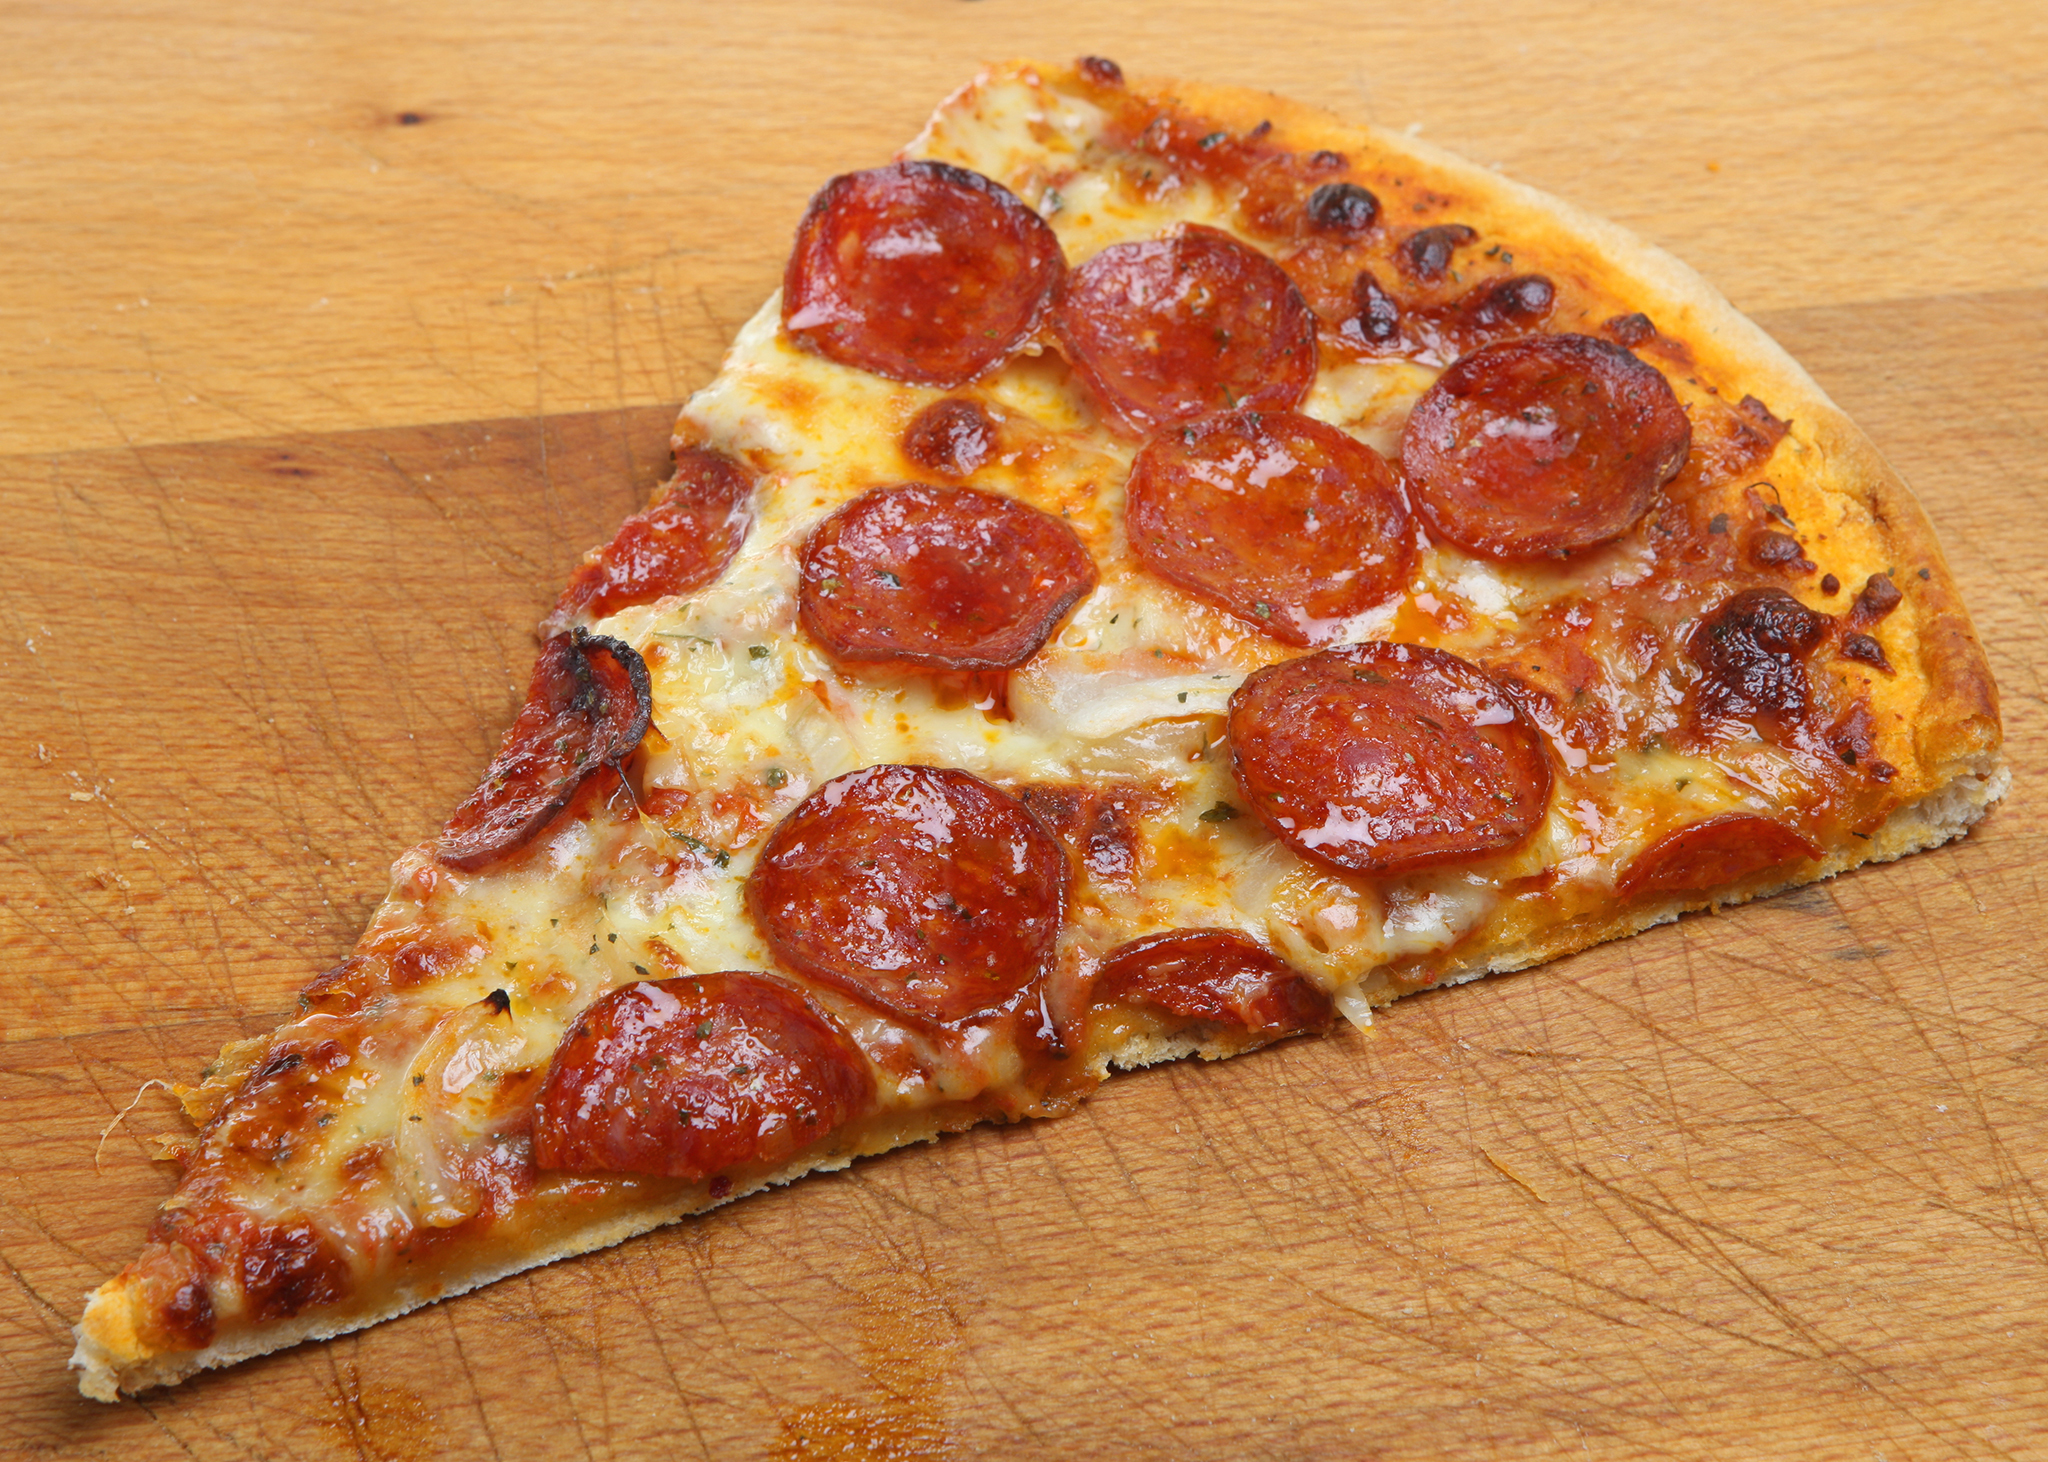 Best 24-hour pizza spots in NYC, from pepperoni to grandma slices